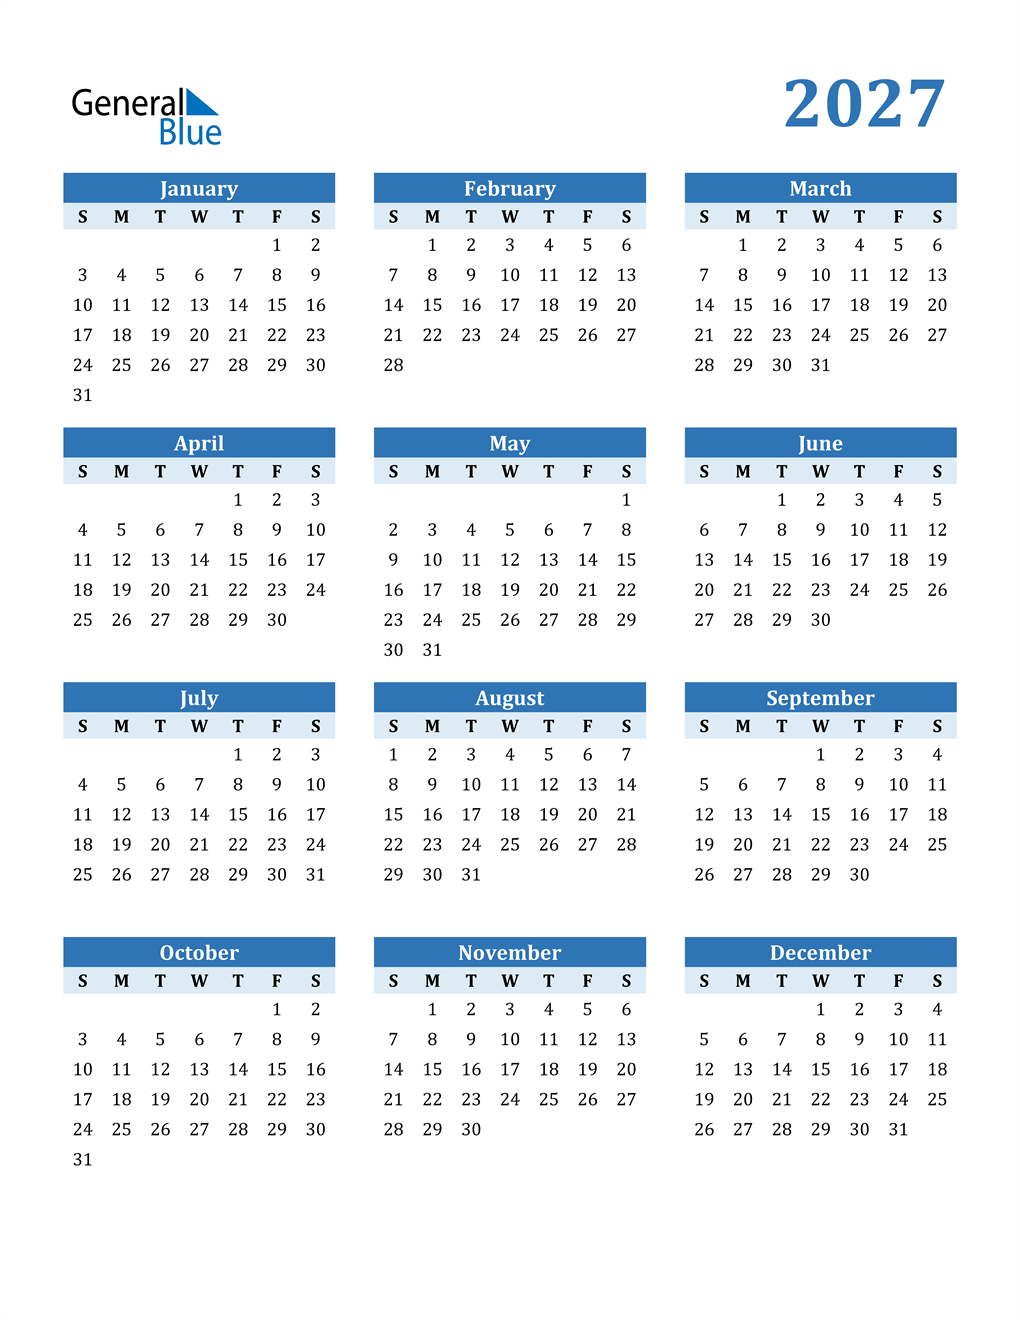 2020 calendar templates and images 2021 calendar templates and images